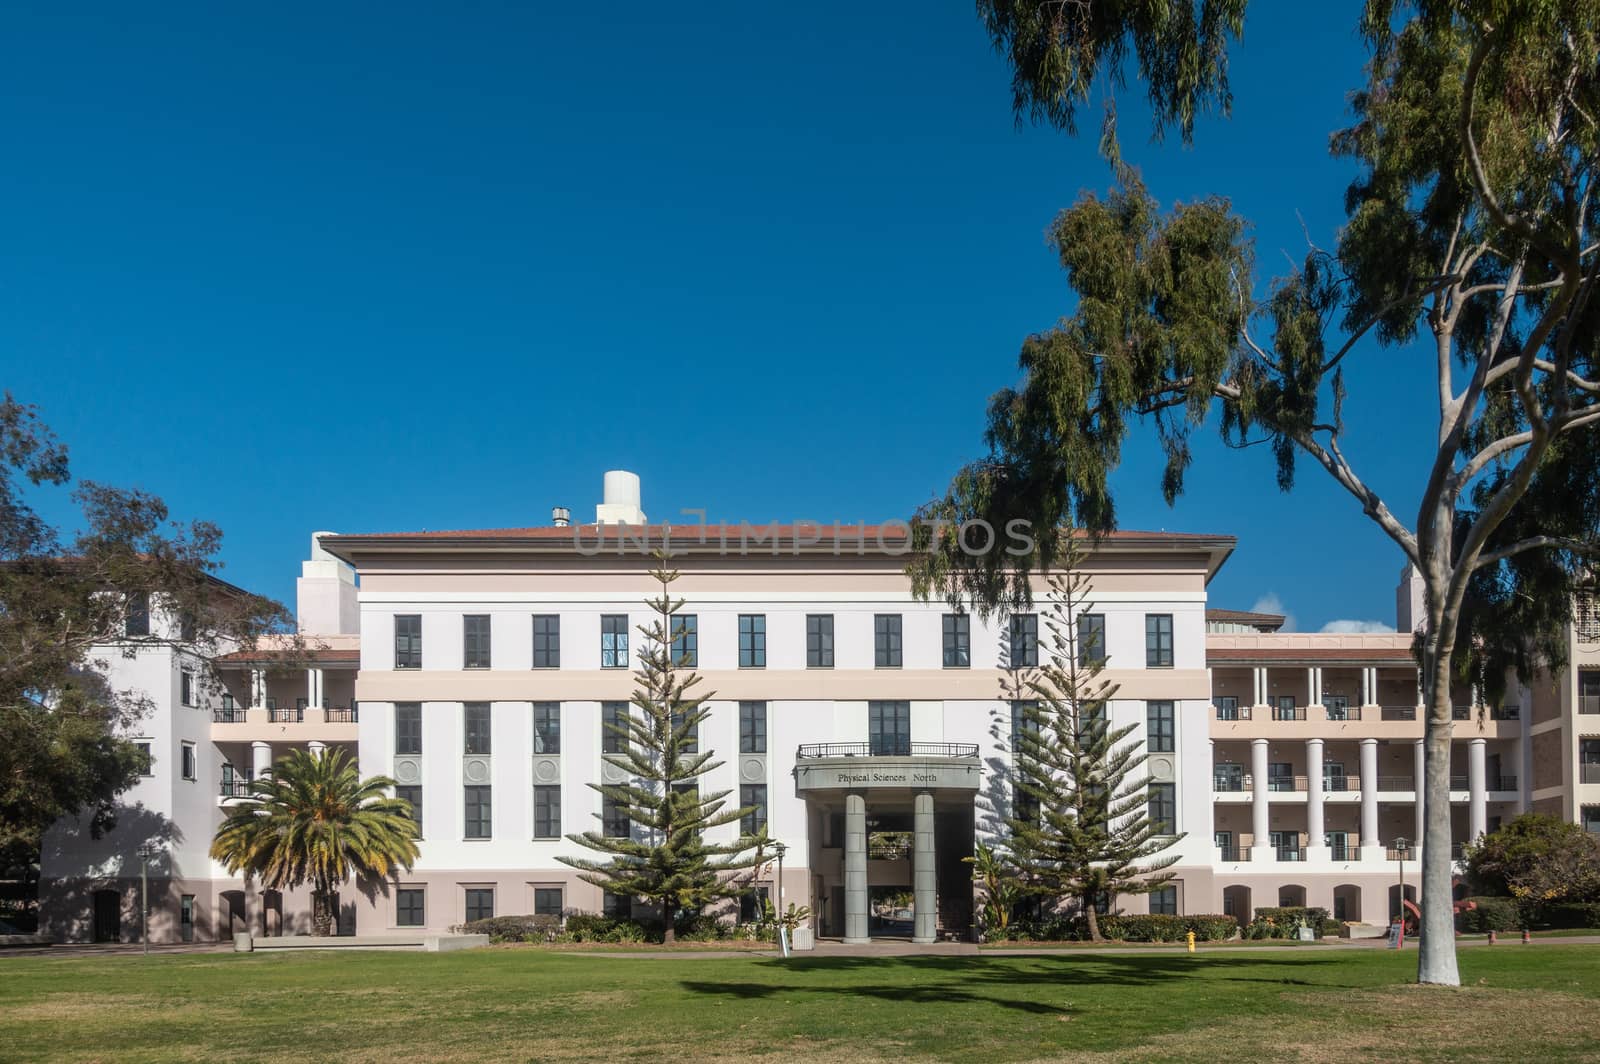 Santa Barbara, California, USA - January 6, 2019: The white and beige modern Physical Sciences North building of UCSB, behind green lawn, trees, and under blue sky.